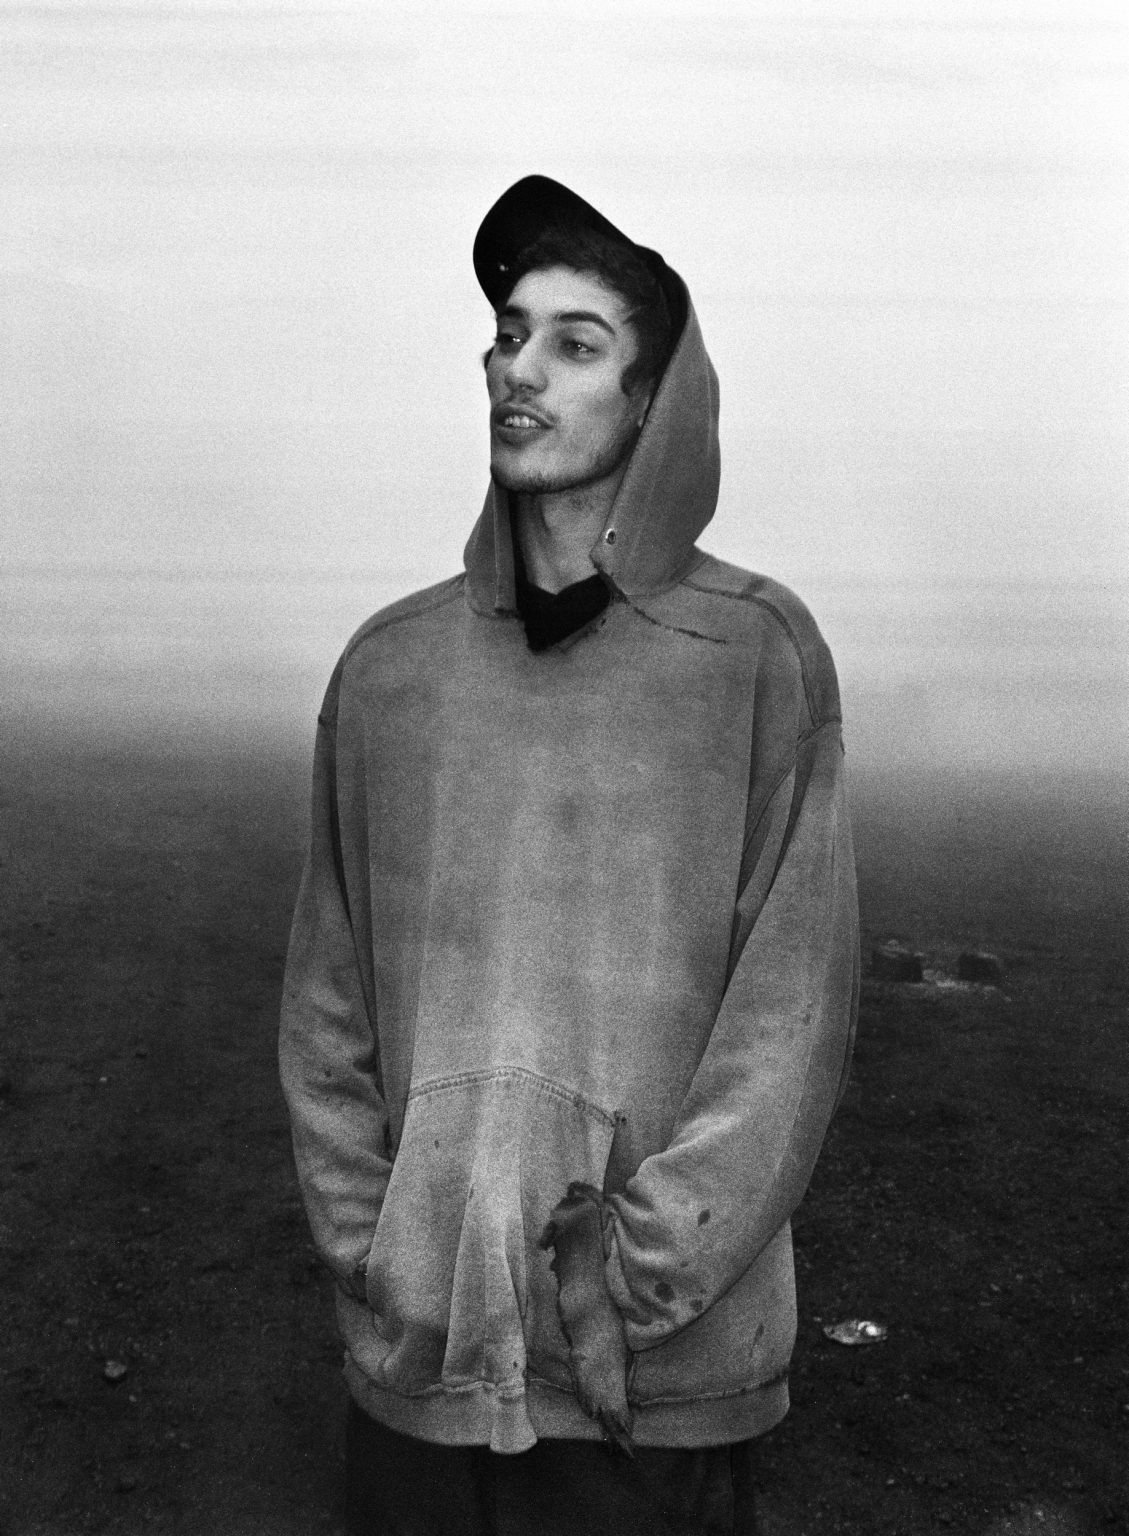 Terragona, Spain, 2002 - Unknown Raver at Fiesta de Espanya, on the final day of the Teknival, near Terragona, in September. The Teknival is usually a week long illegal party that takes place in the summer (mainly August) or during Christmas time in the winter. ><
Terragona, Spagna, 2002  Raver alla Fiesta de Espanya, l'ultimo giorno del Teknival, vicino a Terragona, a settembre. Il Teknival è di solito una festa illegale della durata di una settimana che si svolge in estate (principalmente ad agosto) o durante il periodo natalizio, in inverno.